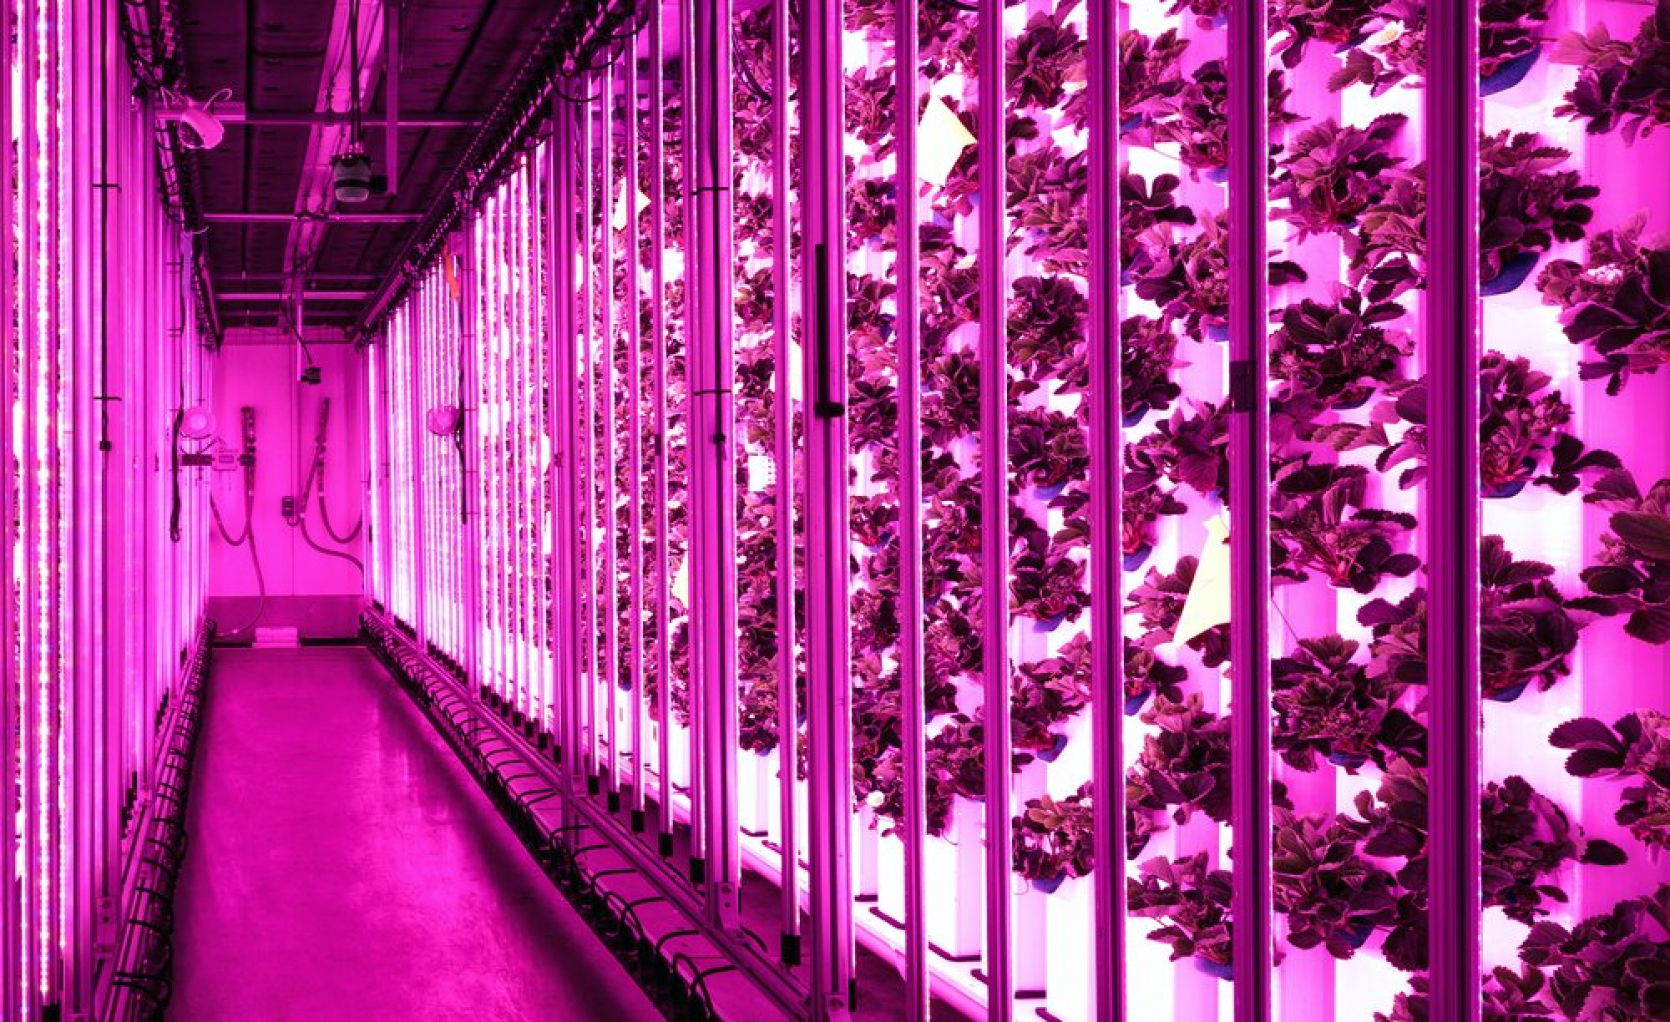 THIS IS WHAT THE FUTURE OF FARMING LOOKS LIKE